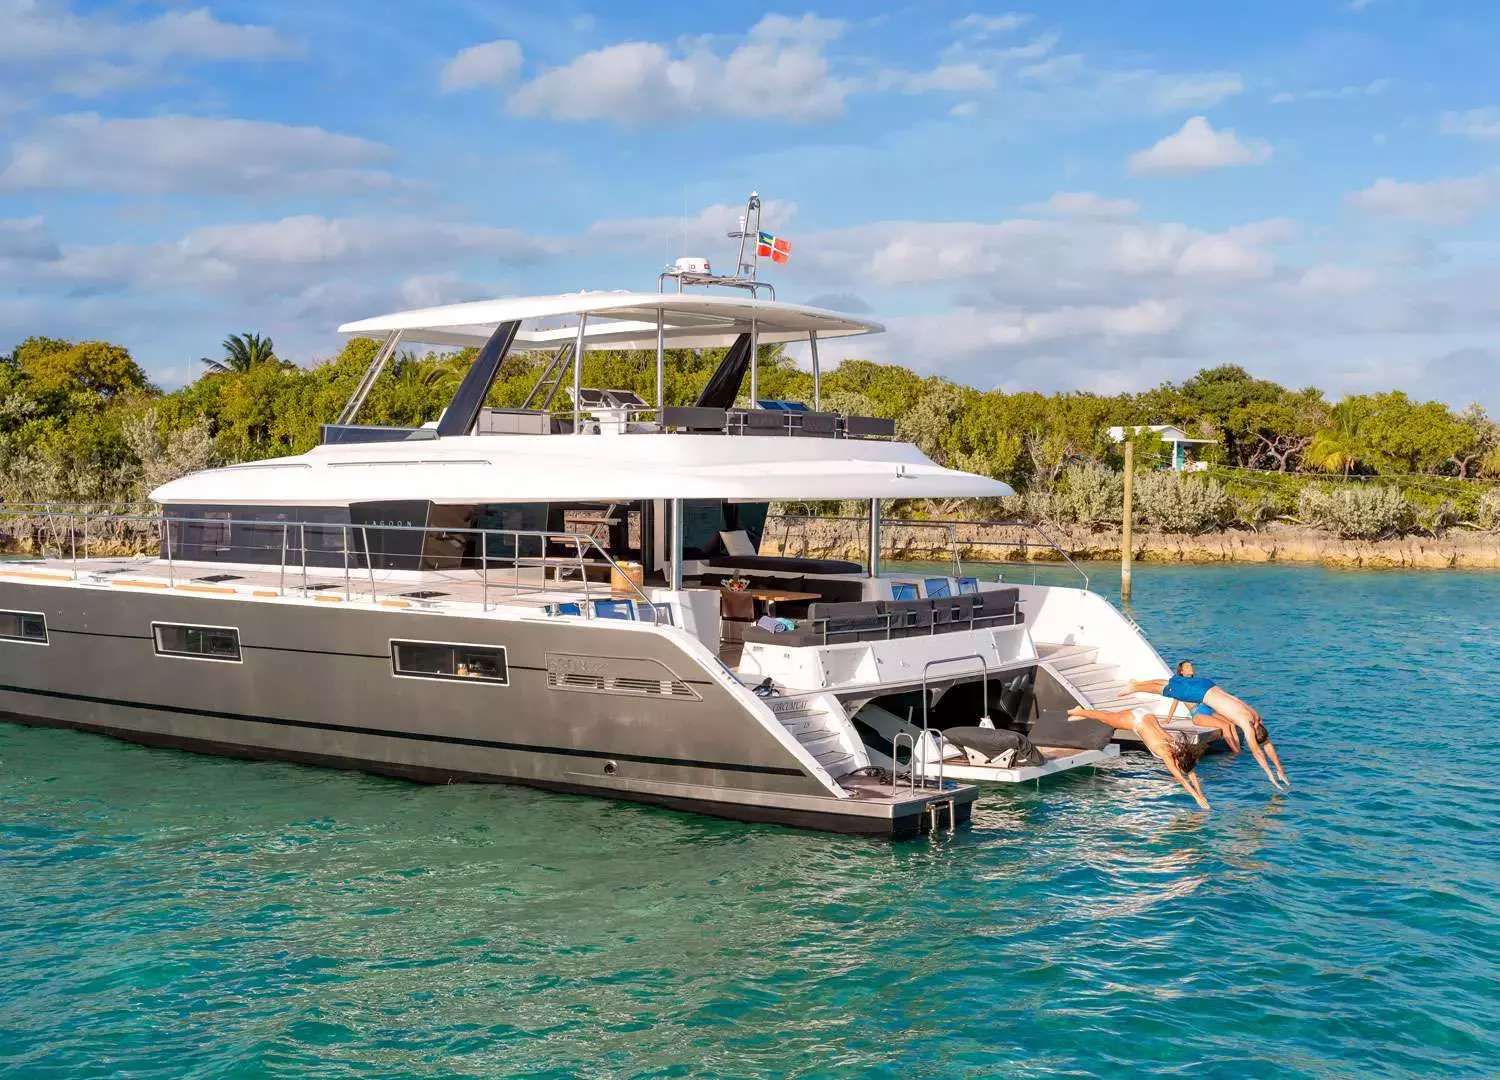 Ultra by Lagoon - Top rates for a Rental of a private Power Catamaran in US Virgin Islands